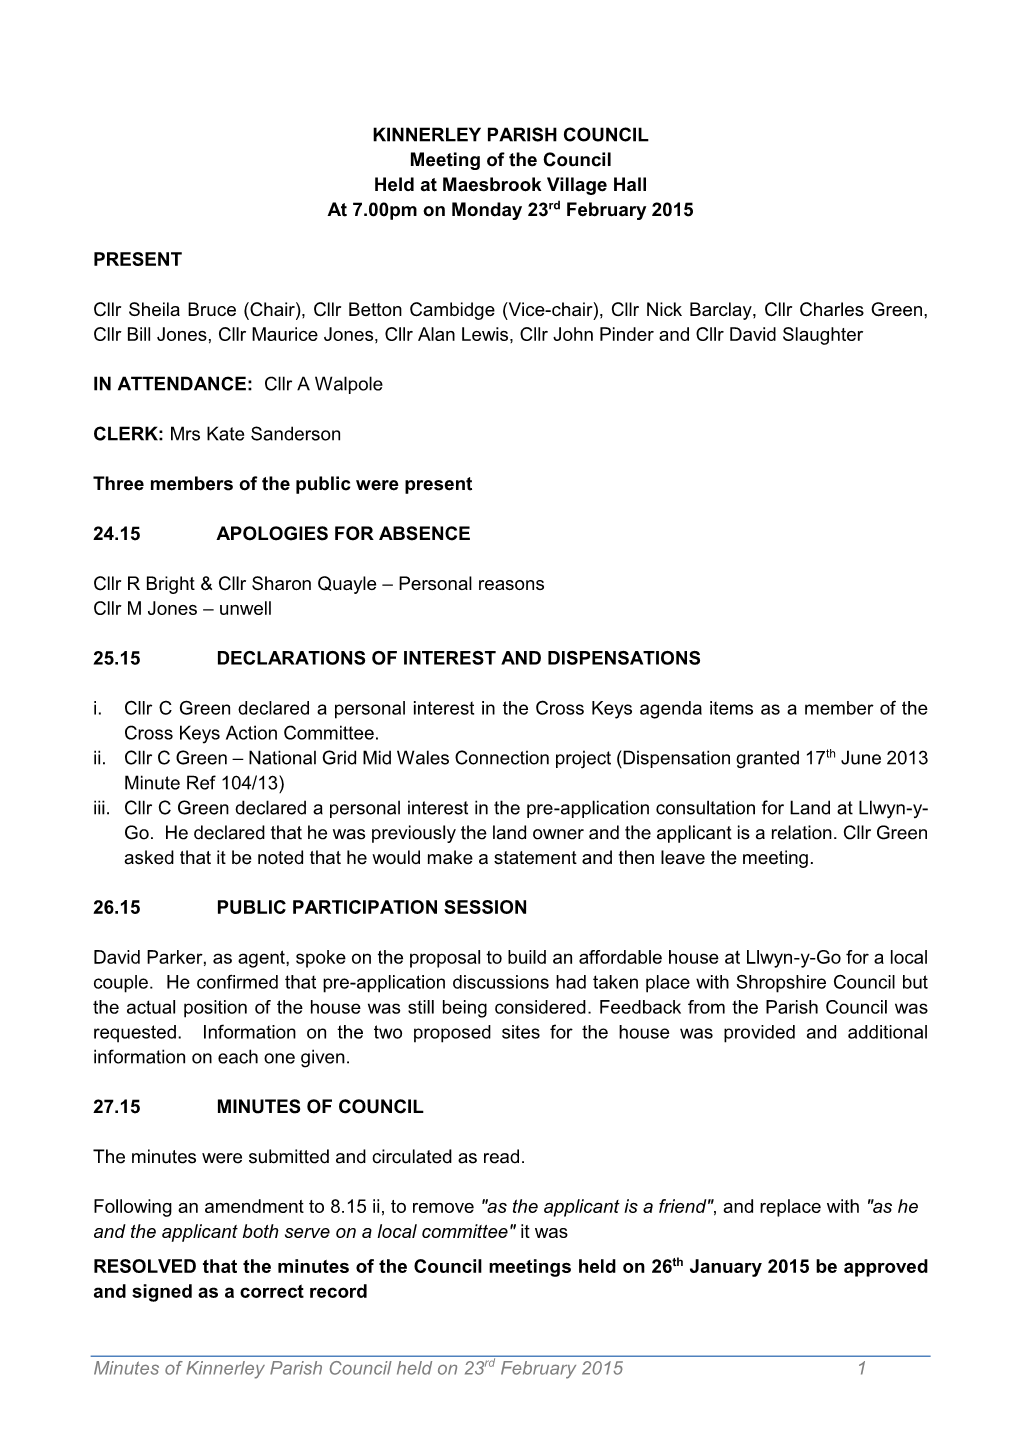 Minutes of Kinnerley Parish Council Held on 23Rd February 2015 1